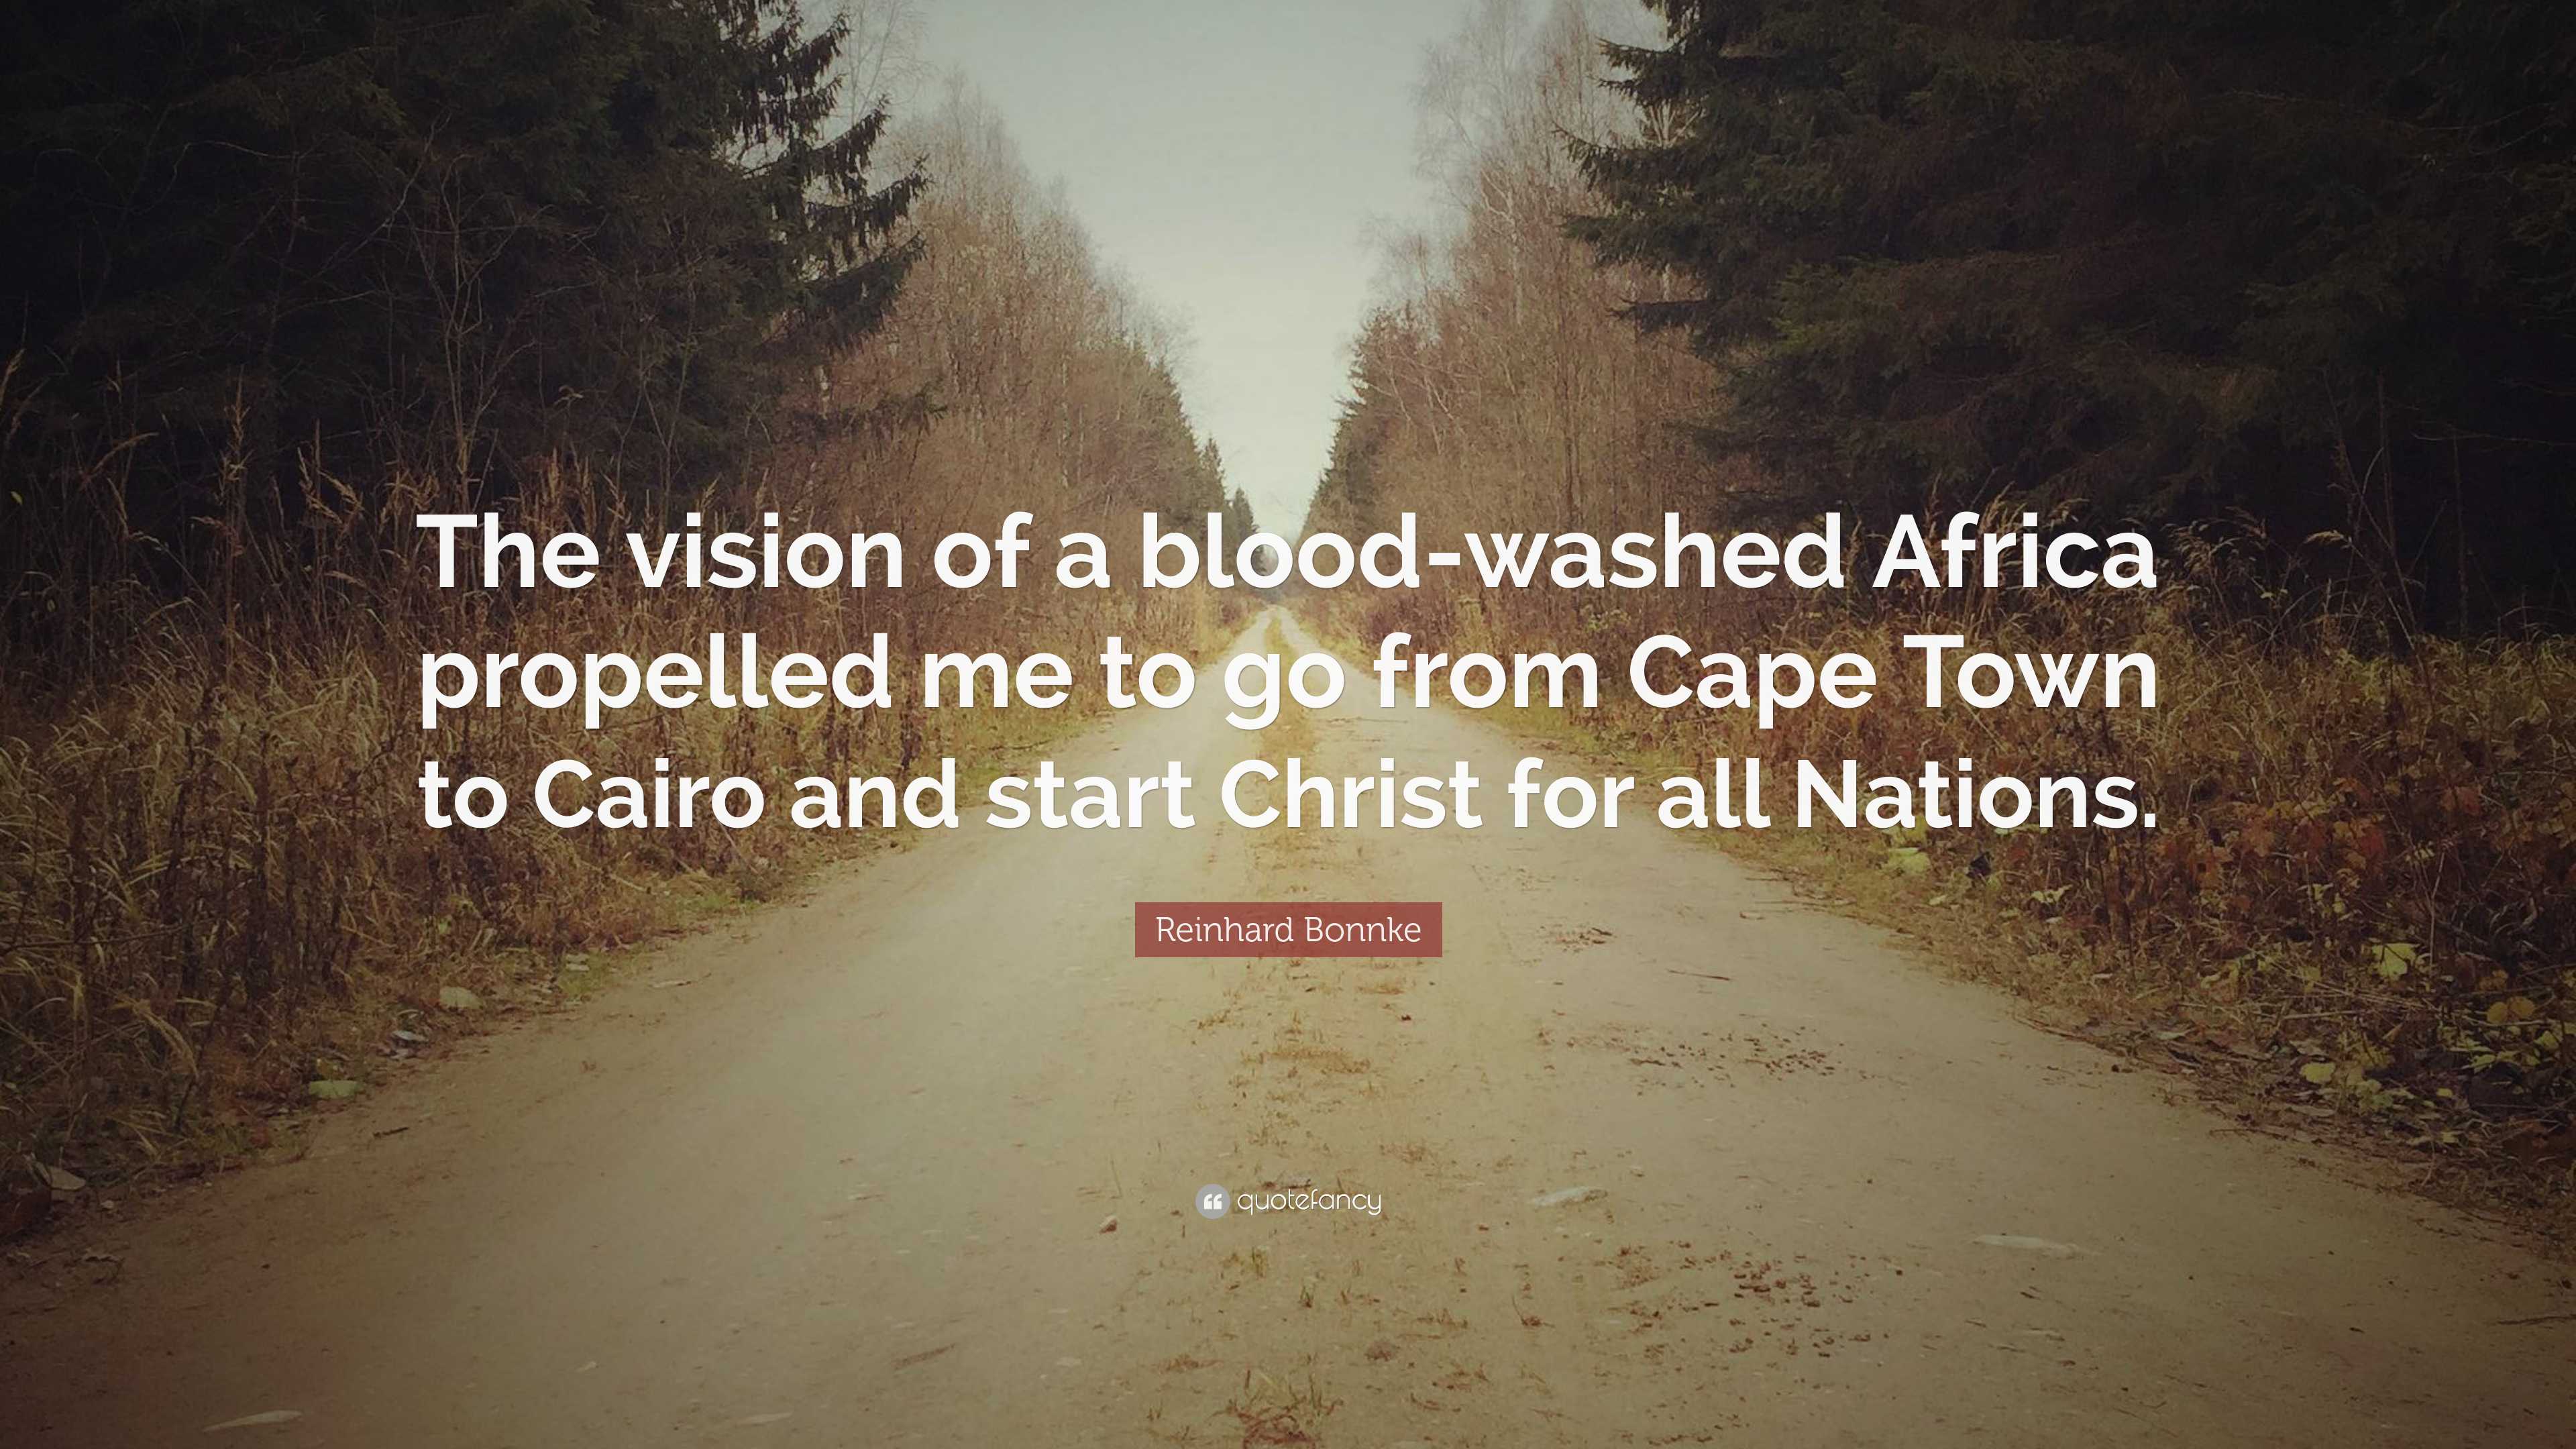 Reinhard Bonnke Quote: “The vision of a blood-washed Africa propelled me to  go from Cape